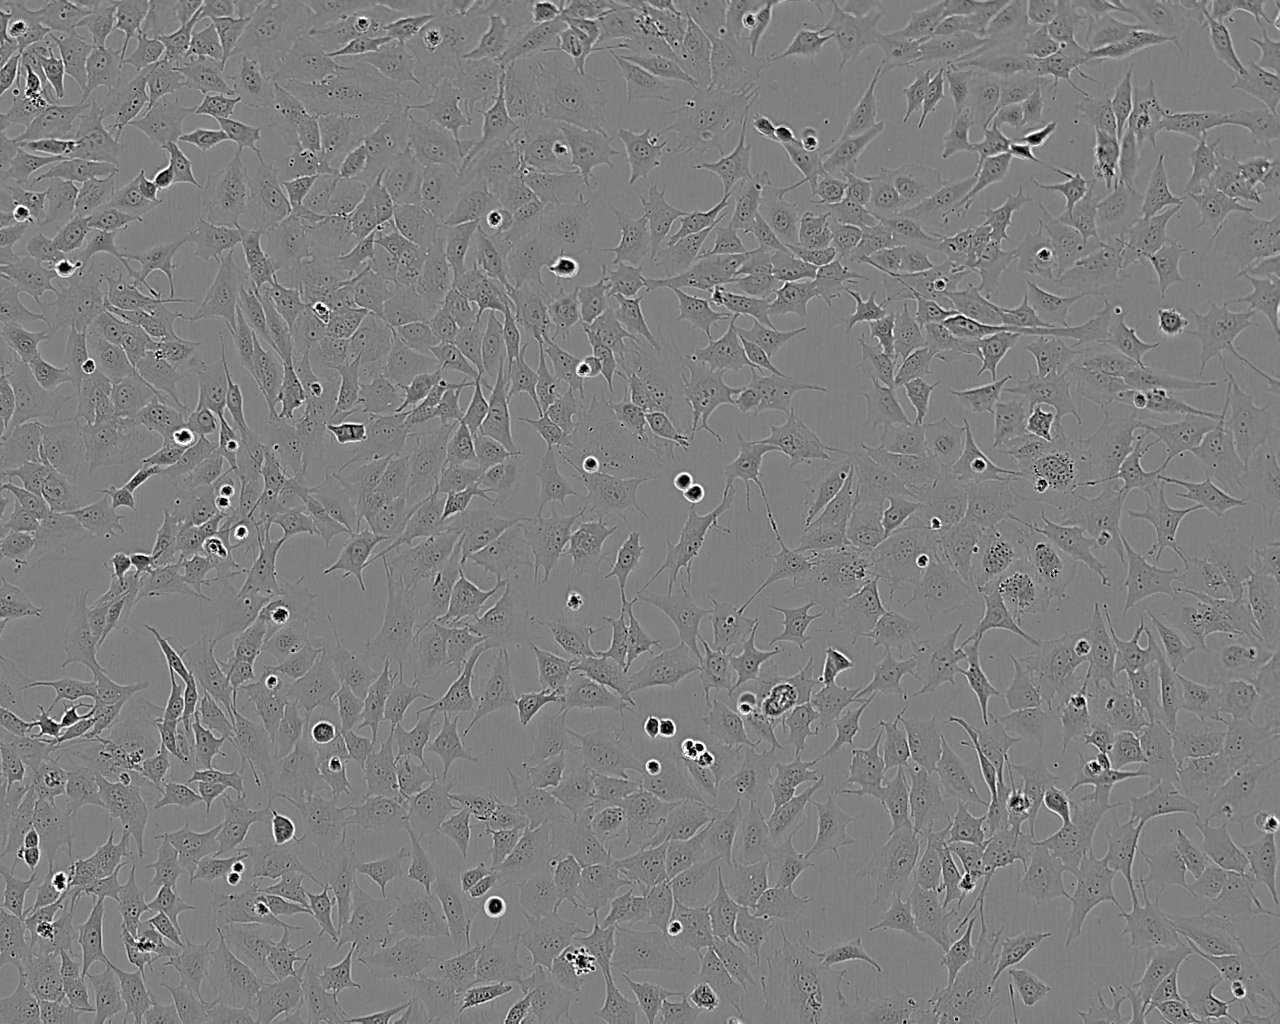 NCI-H1954 Epithelial Cell|人肺癌传代细胞(有STR鉴定),NCI-H1954 Epithelial Cell